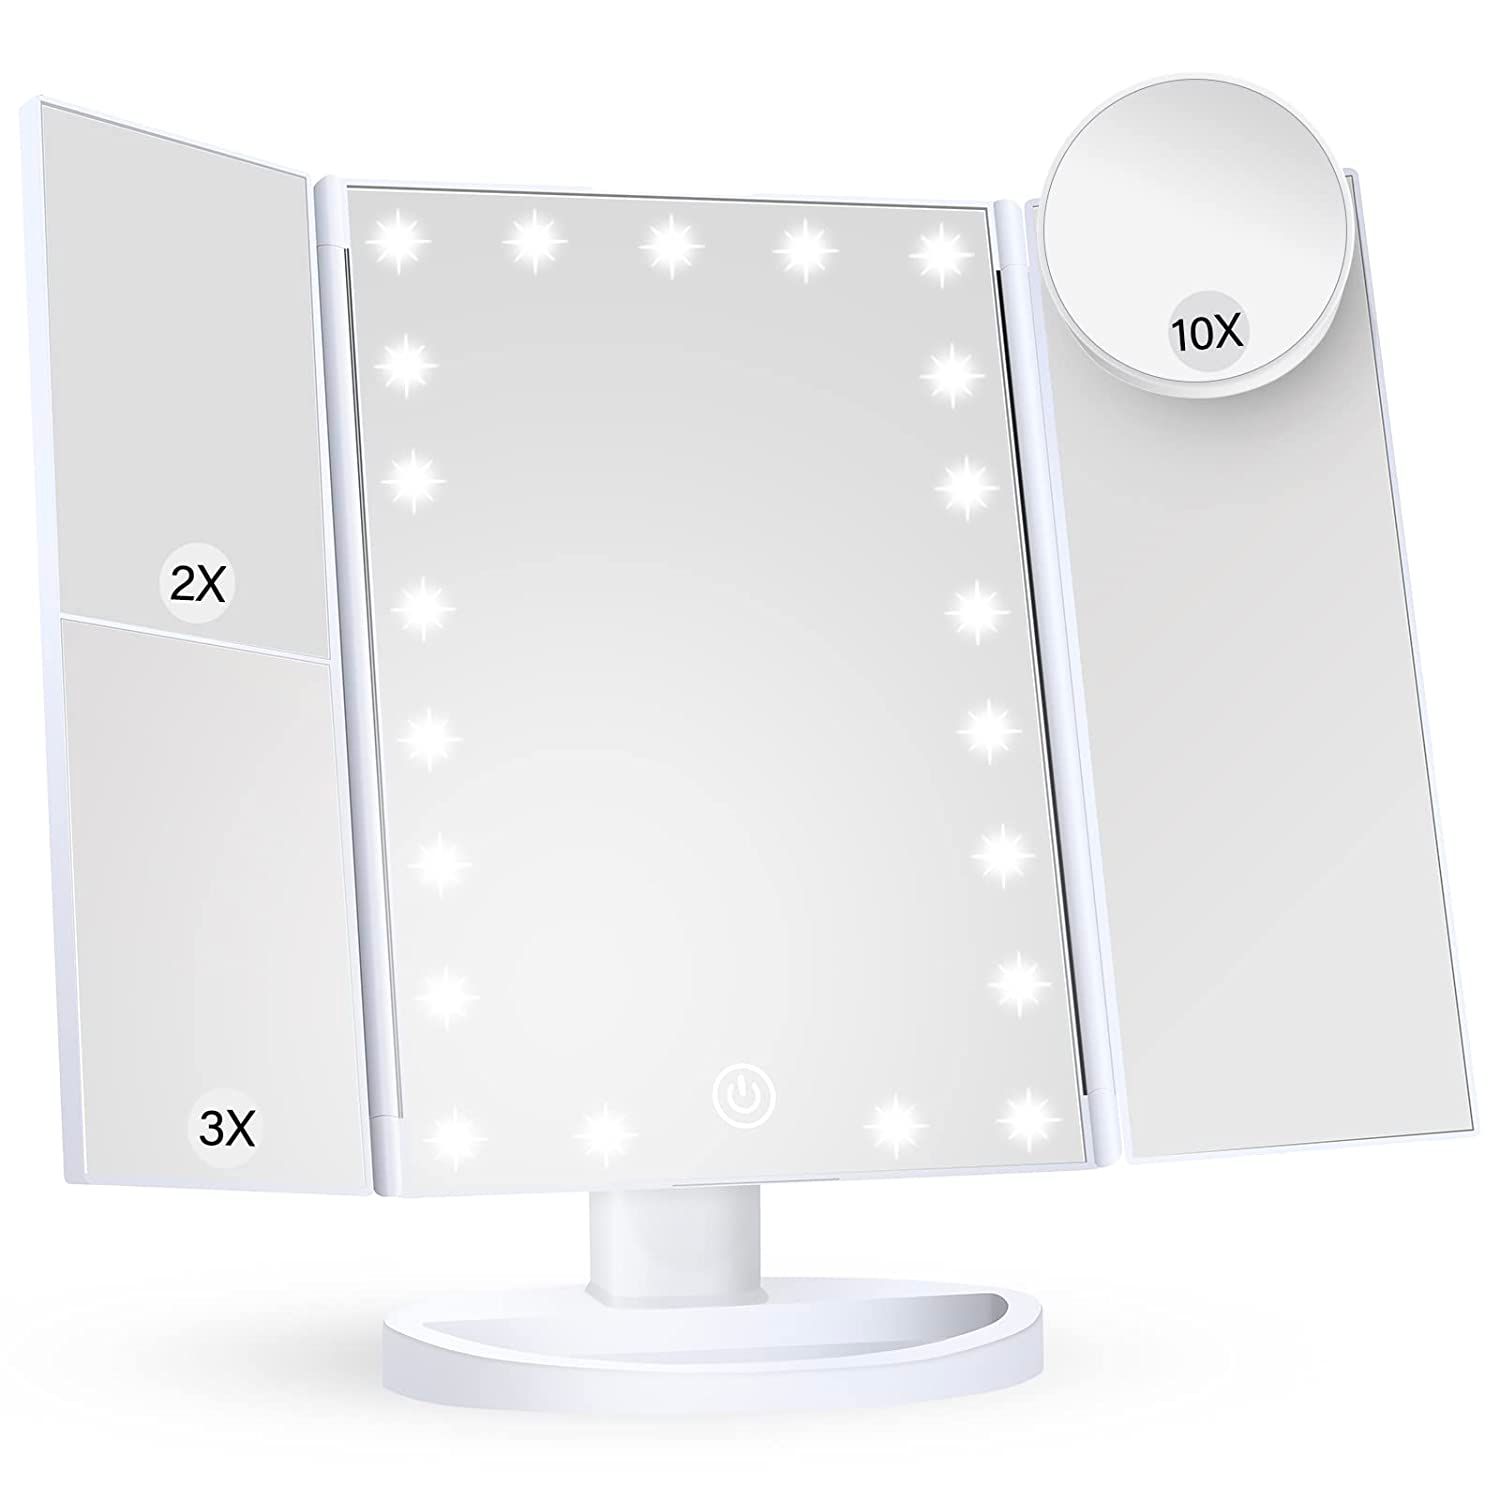 The Best Gifts for College Students: Lighted Vanity Mirror